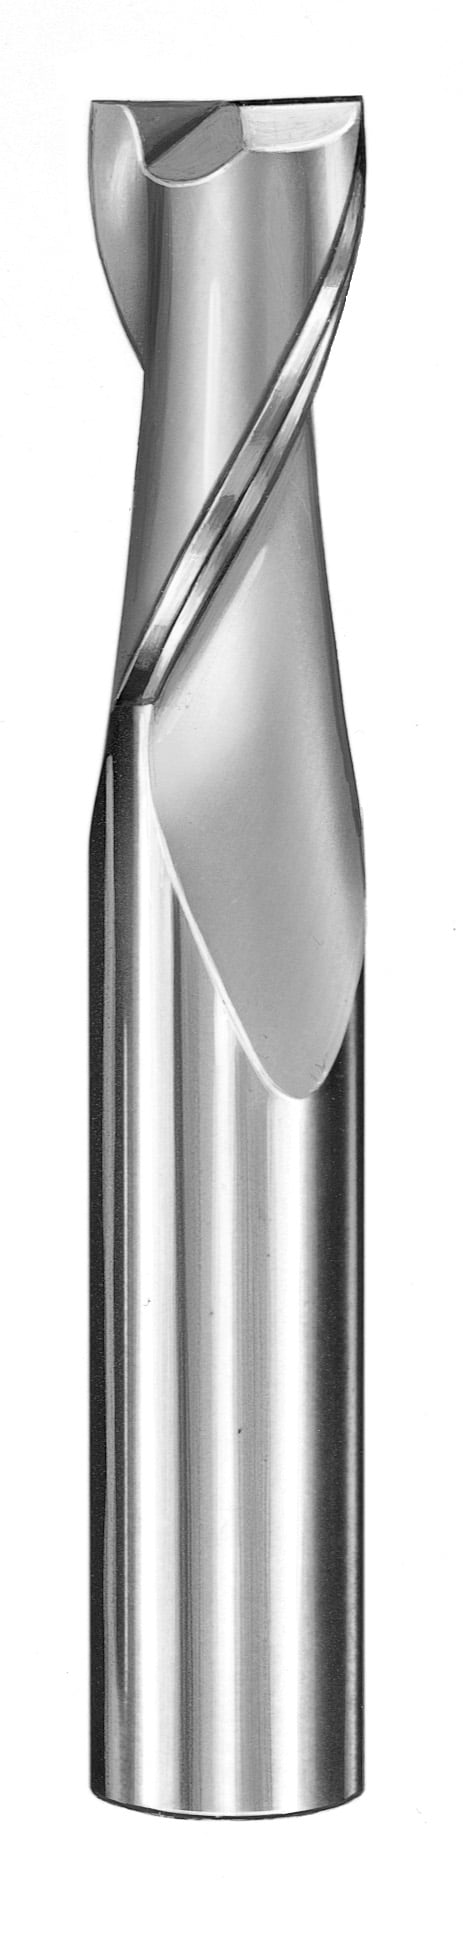 1/2" Dia, 2 Flute, Square End End Mill - 91290